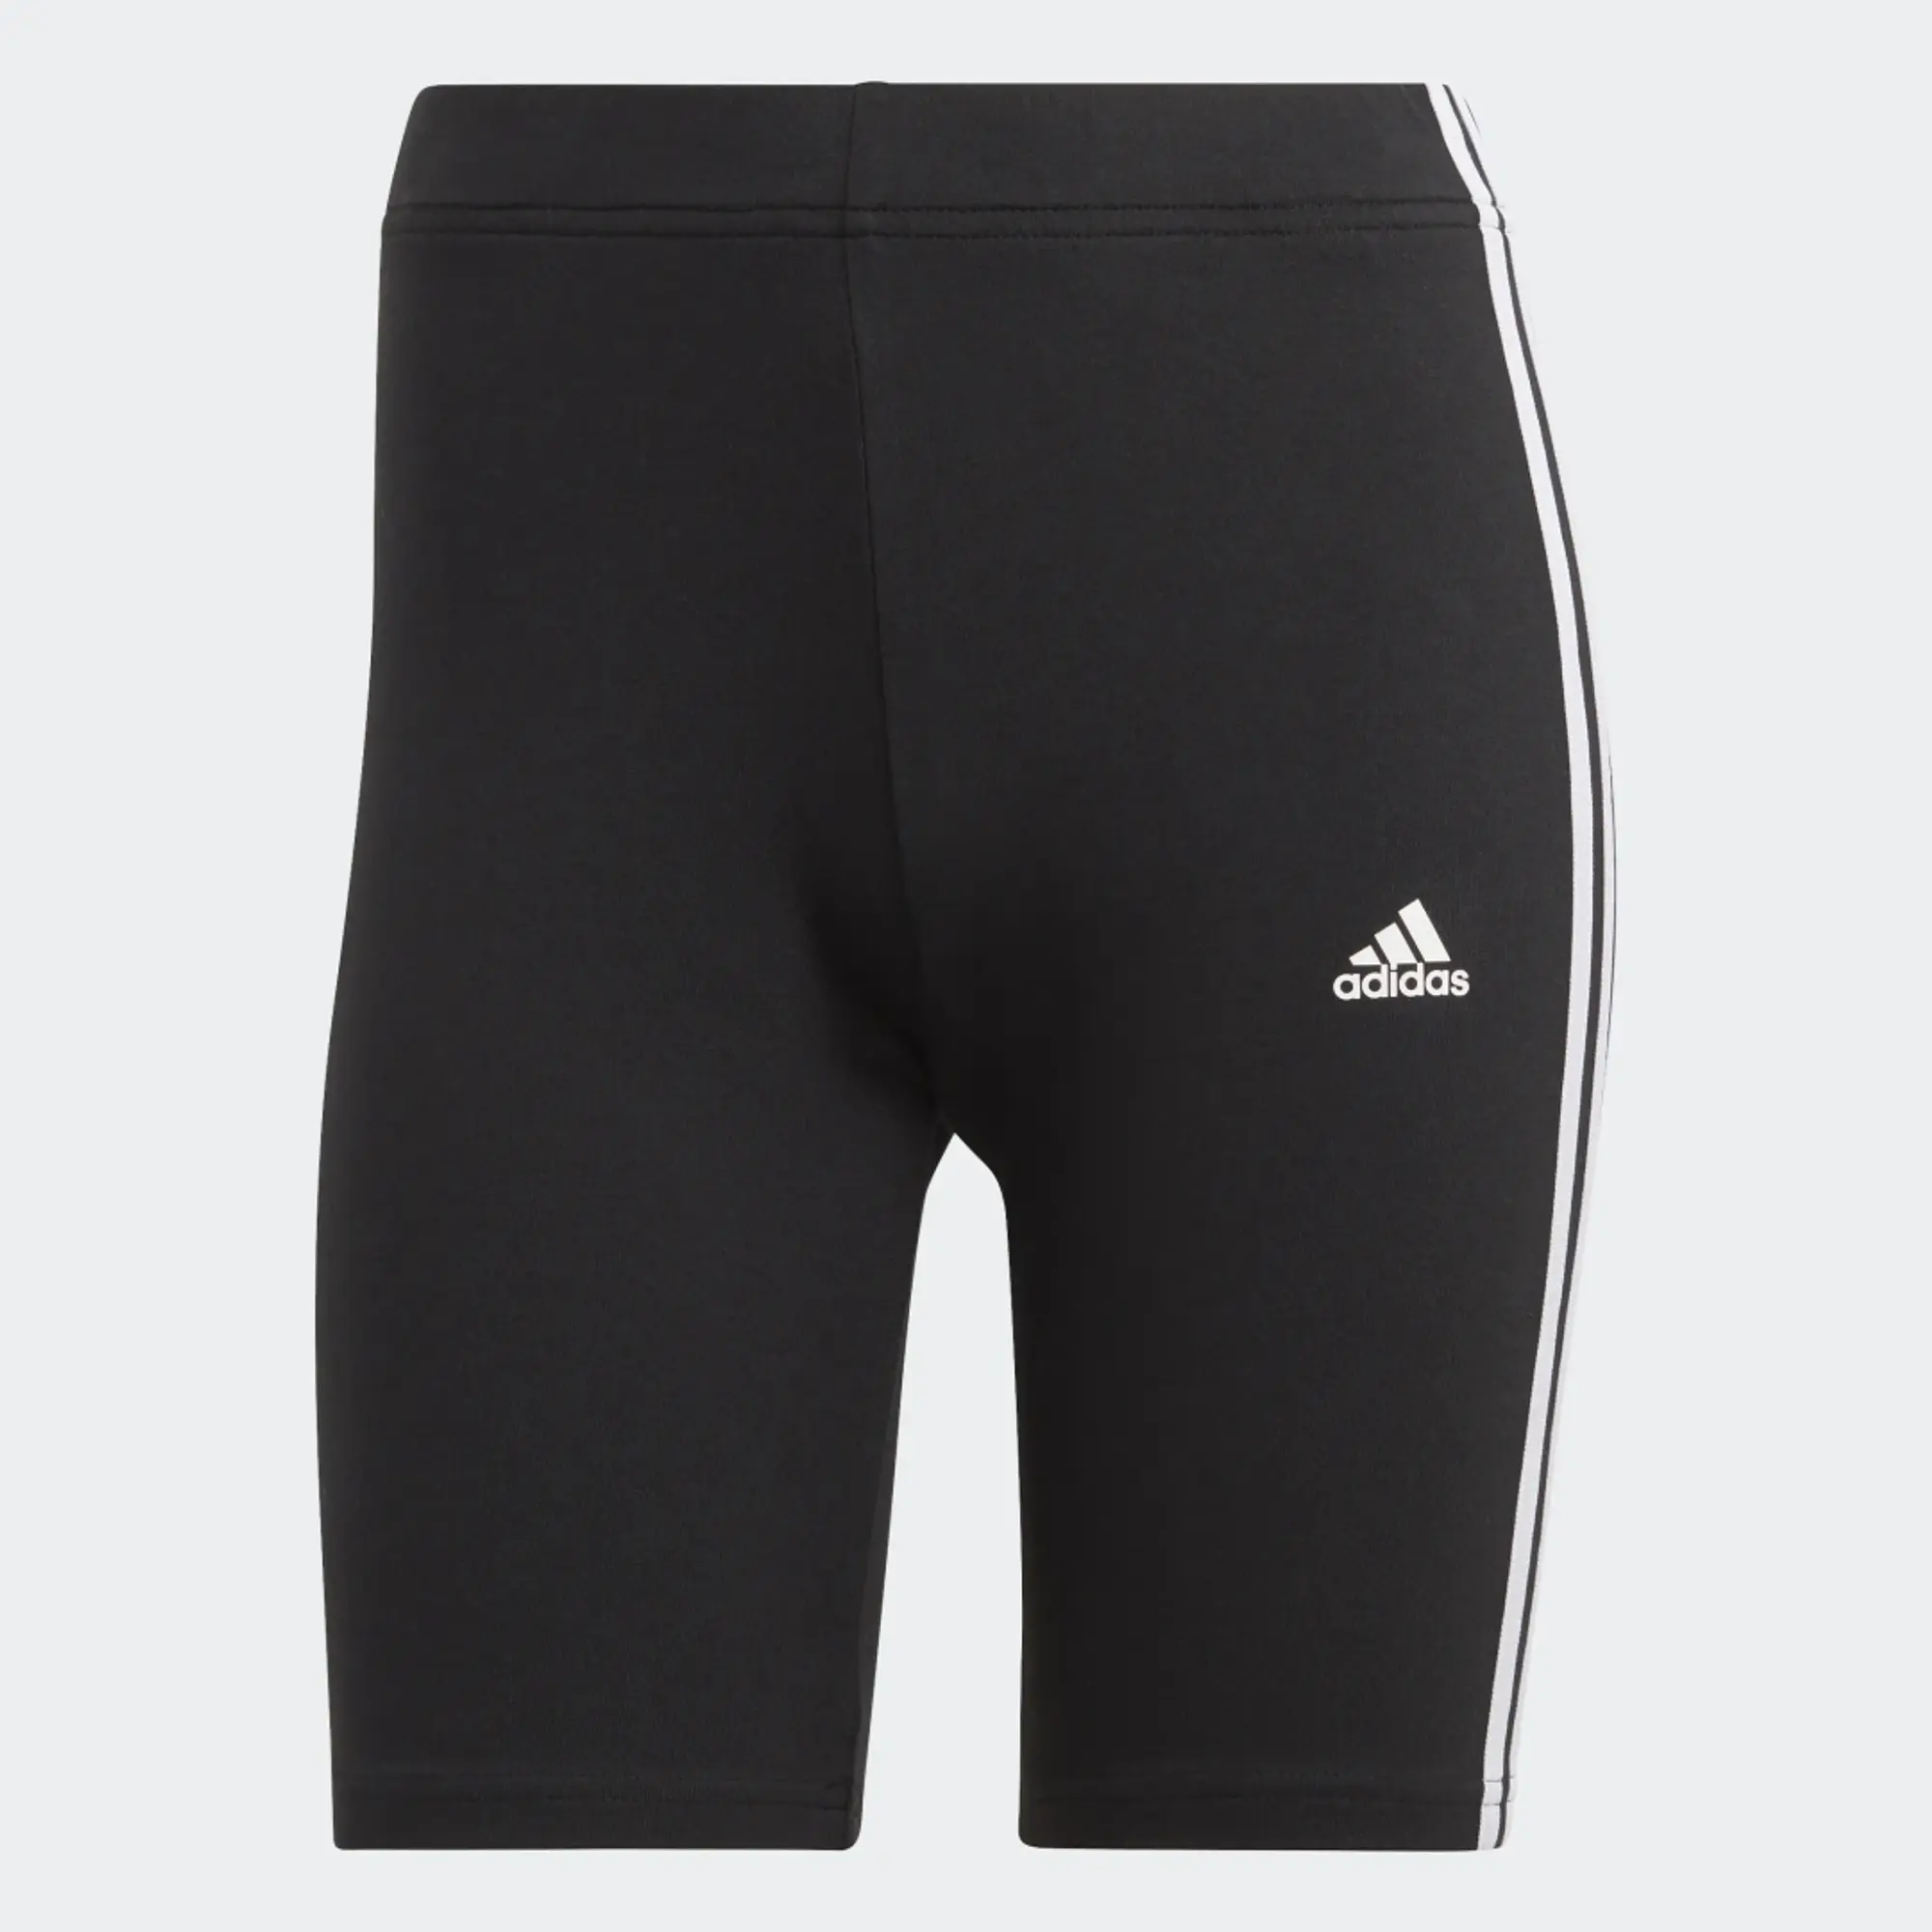 adidas Fitness Shorts - Black With White Stripes